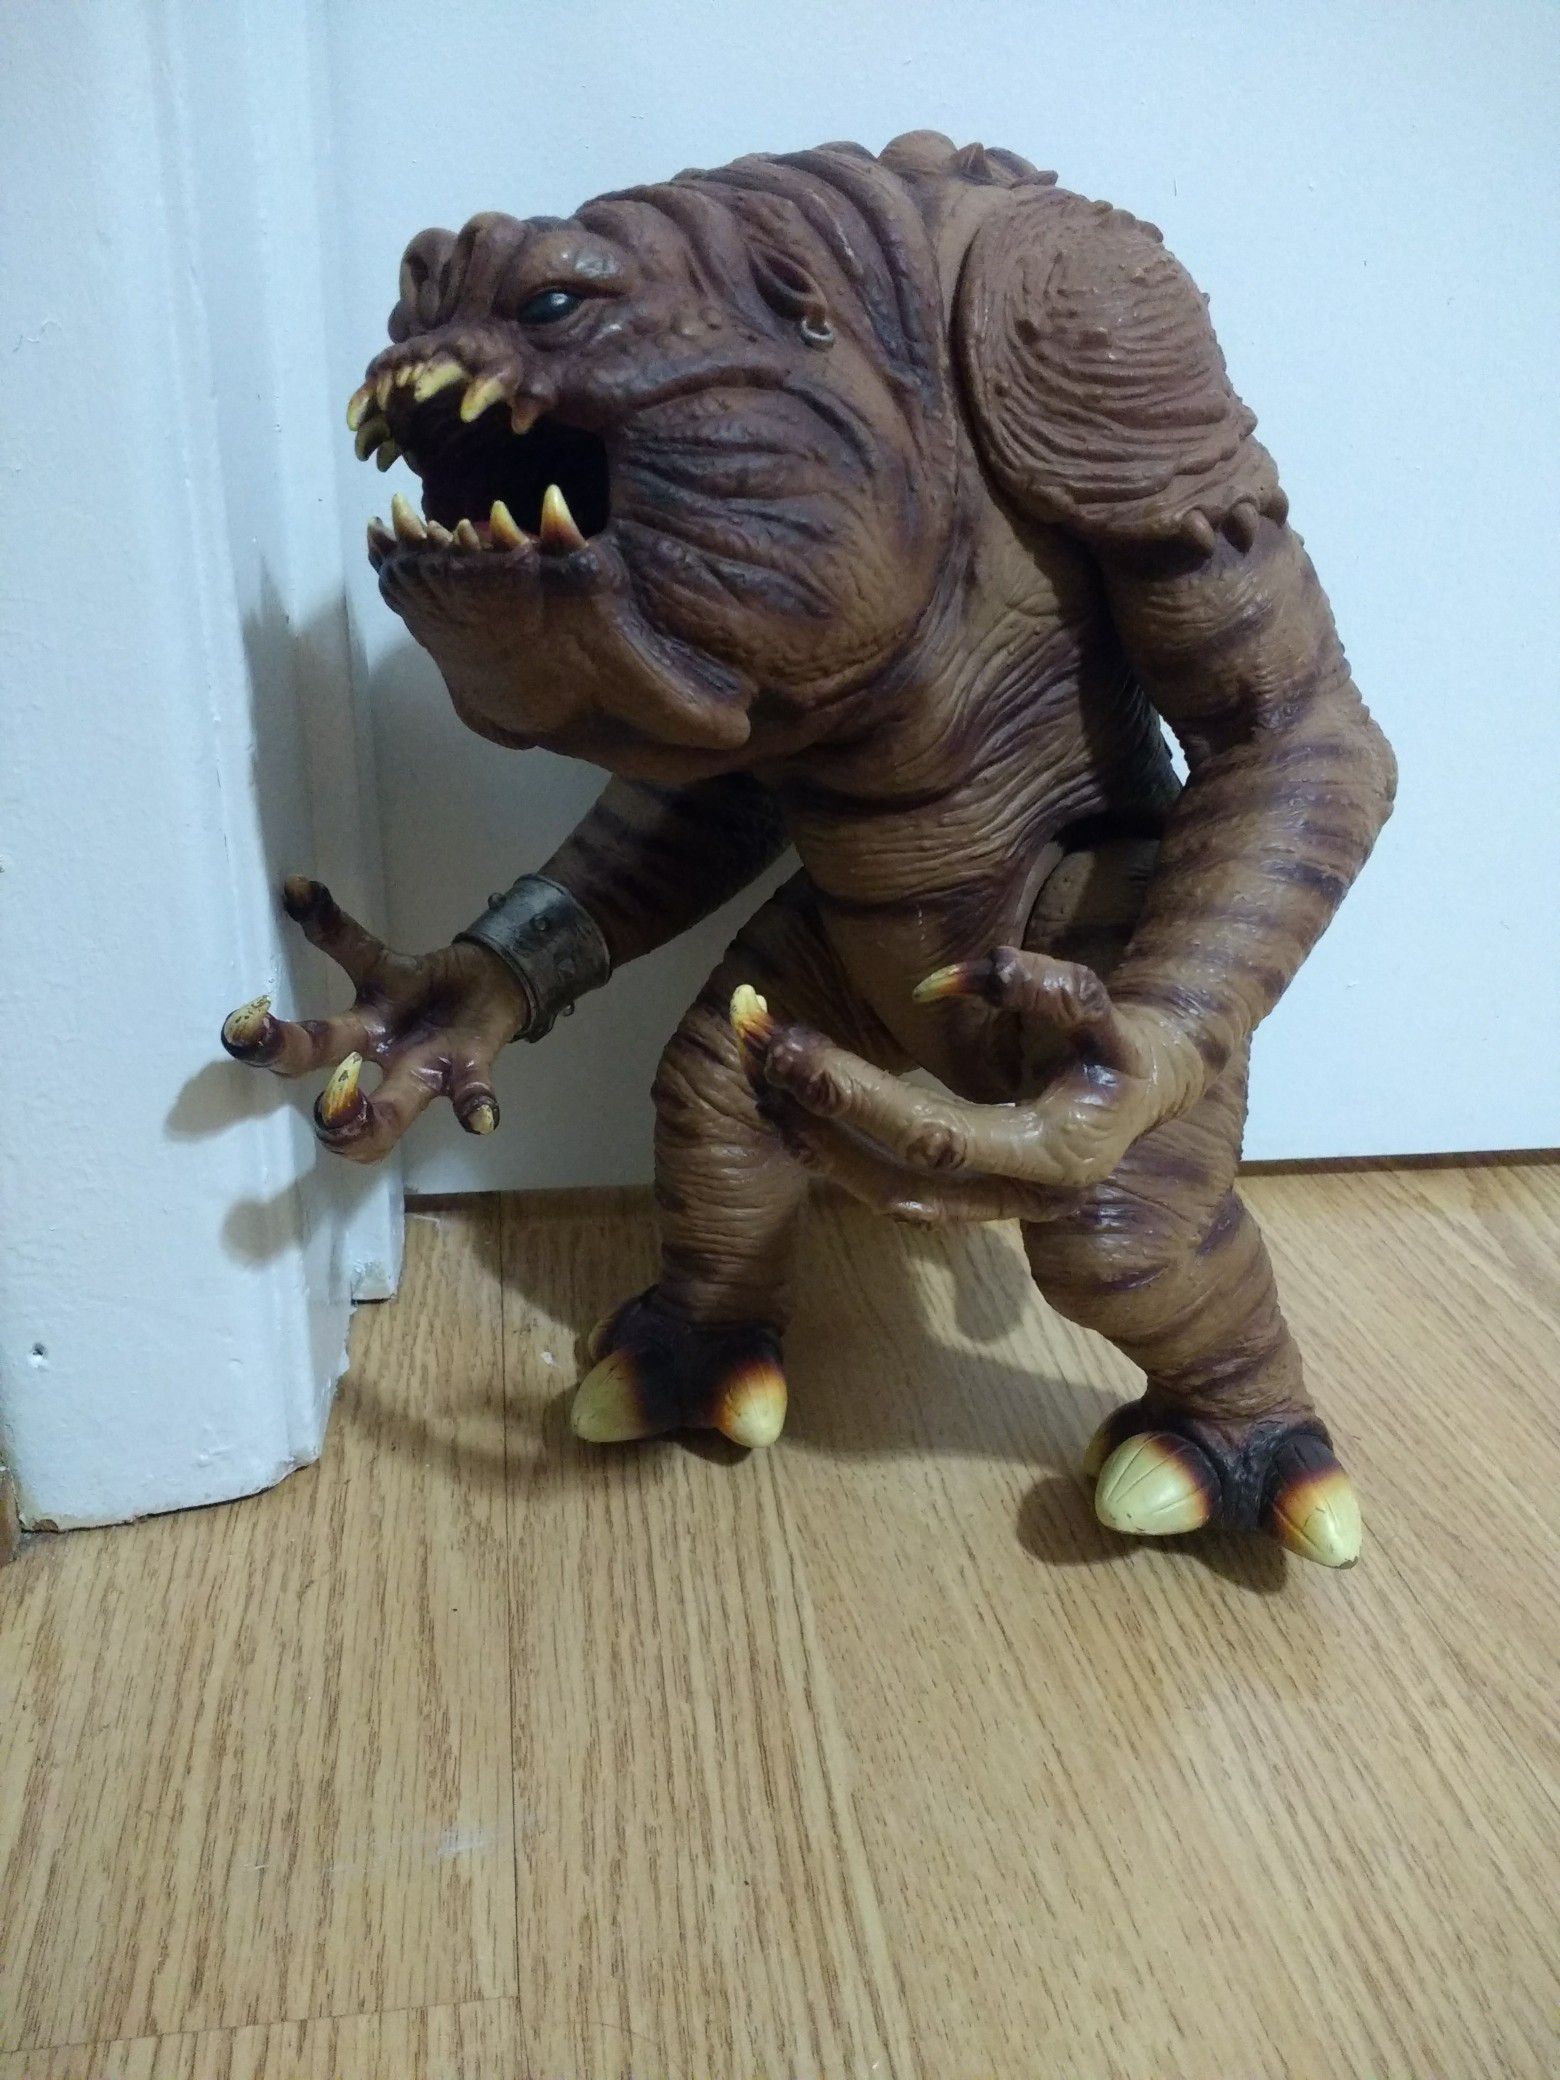 "Star Wars Power of the Force" Rancor action figure